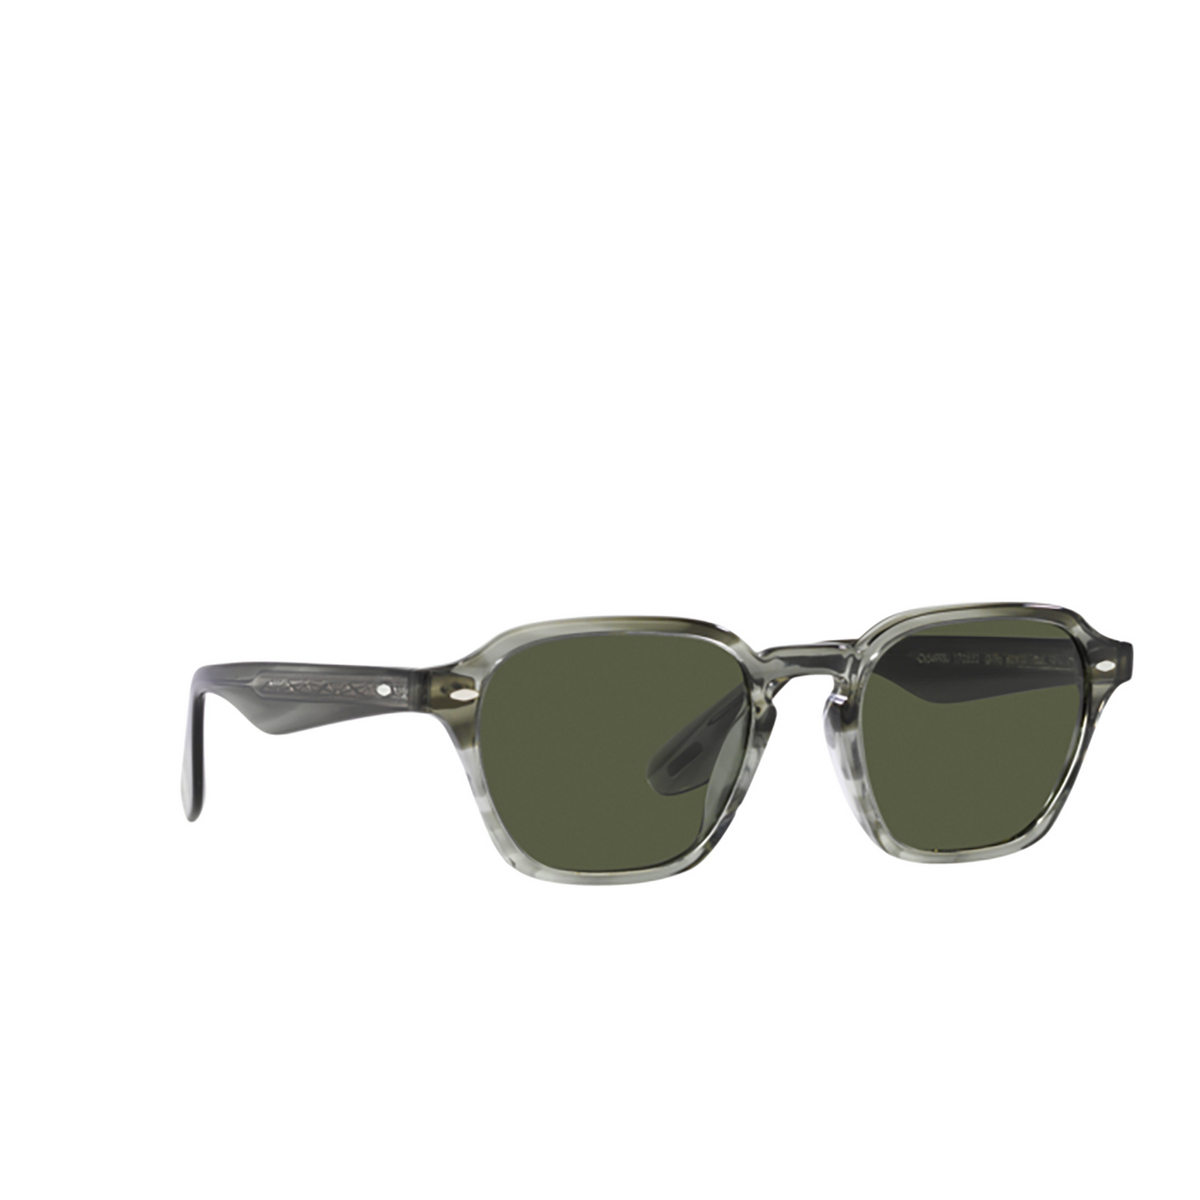 Oliver Peoples GRIFFO Sunglasses 170552 Washed jade - three-quarters view